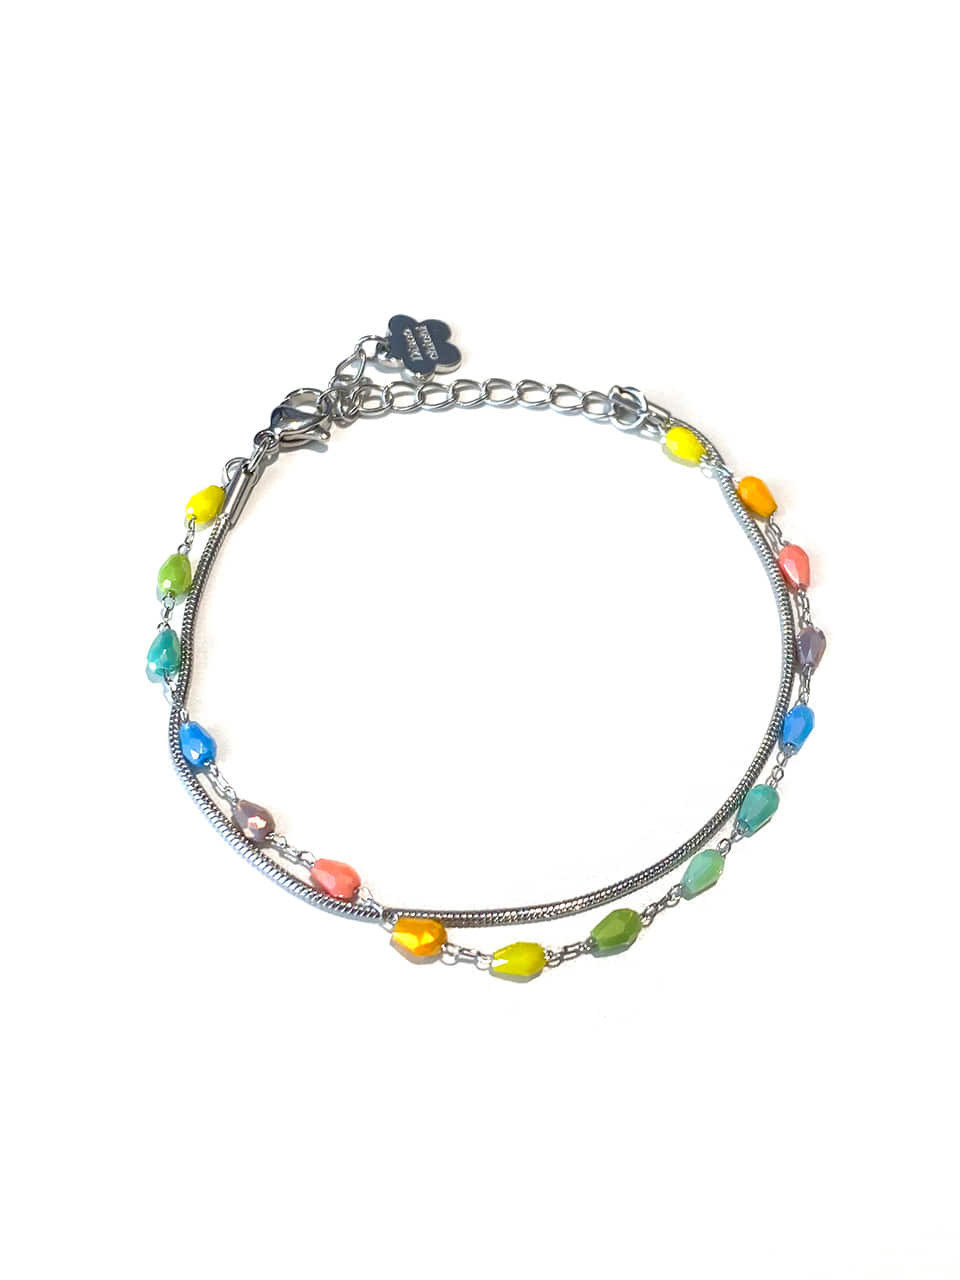 DV028 [Surgical steel] Colorful layered bracelet